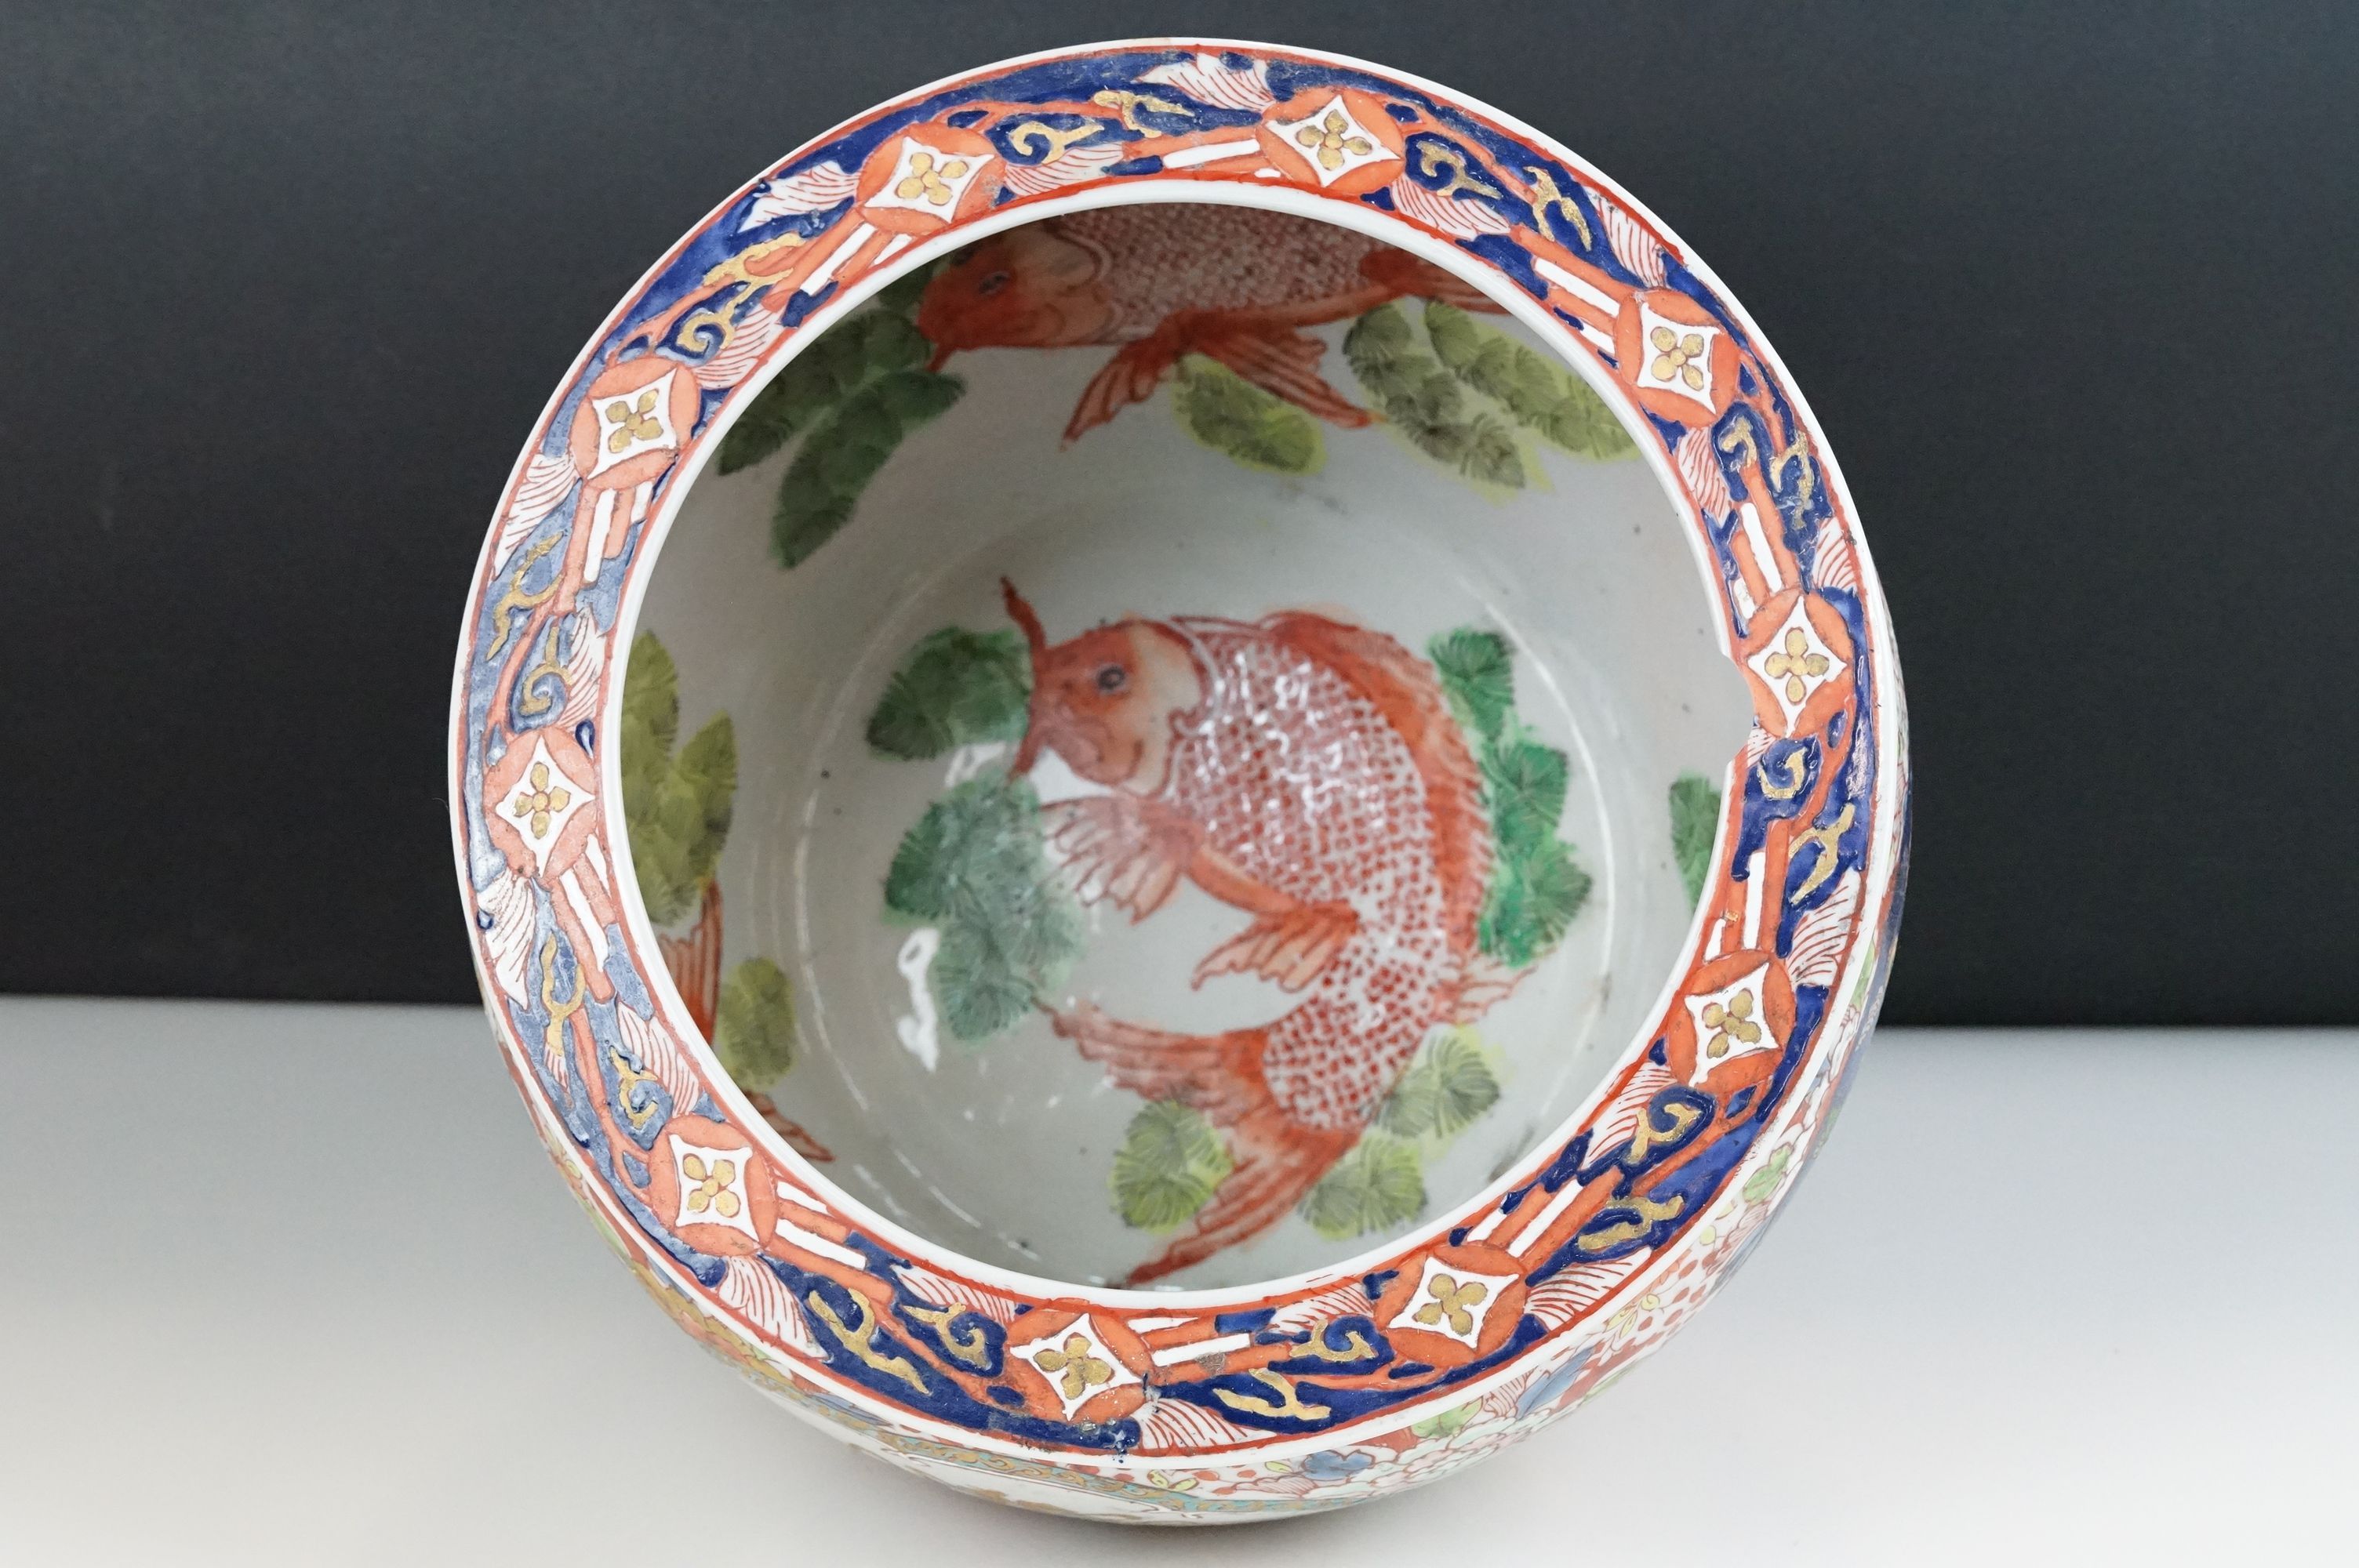 20th century Chinese Stoneware Fish Bowl decorated in a floral pattern of red, greens and blues, - Image 5 of 10